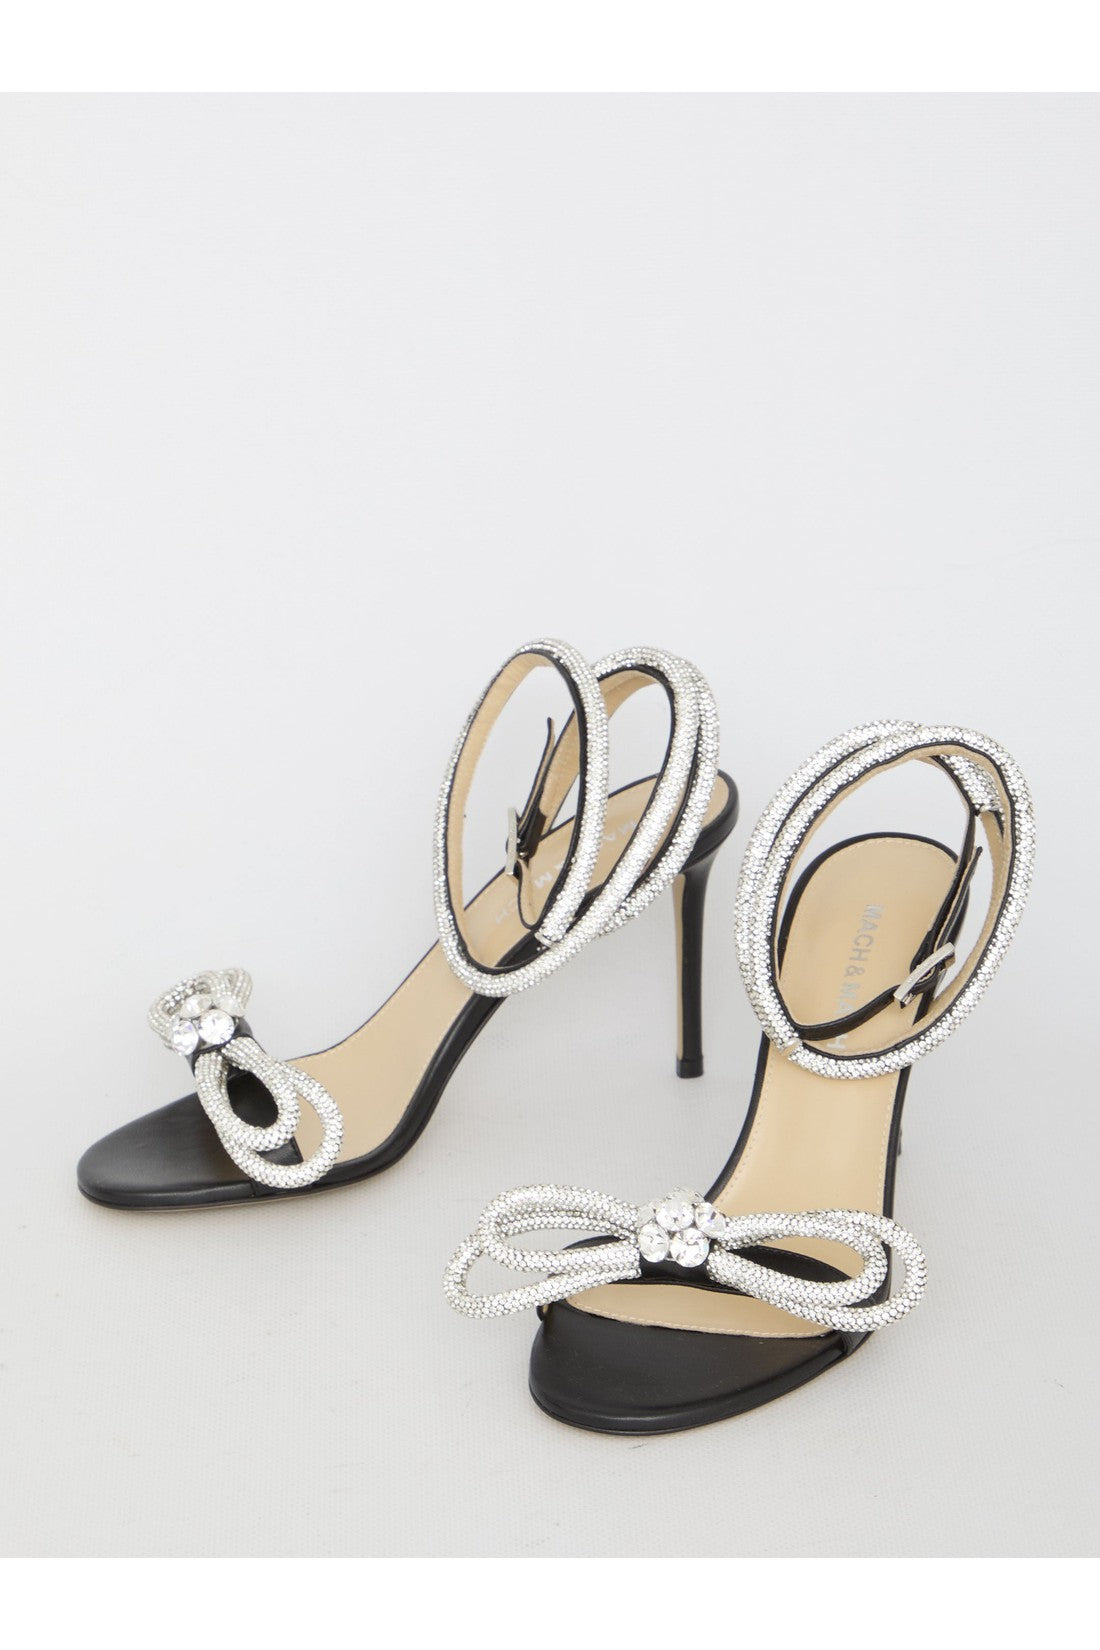 Double Bow sandals